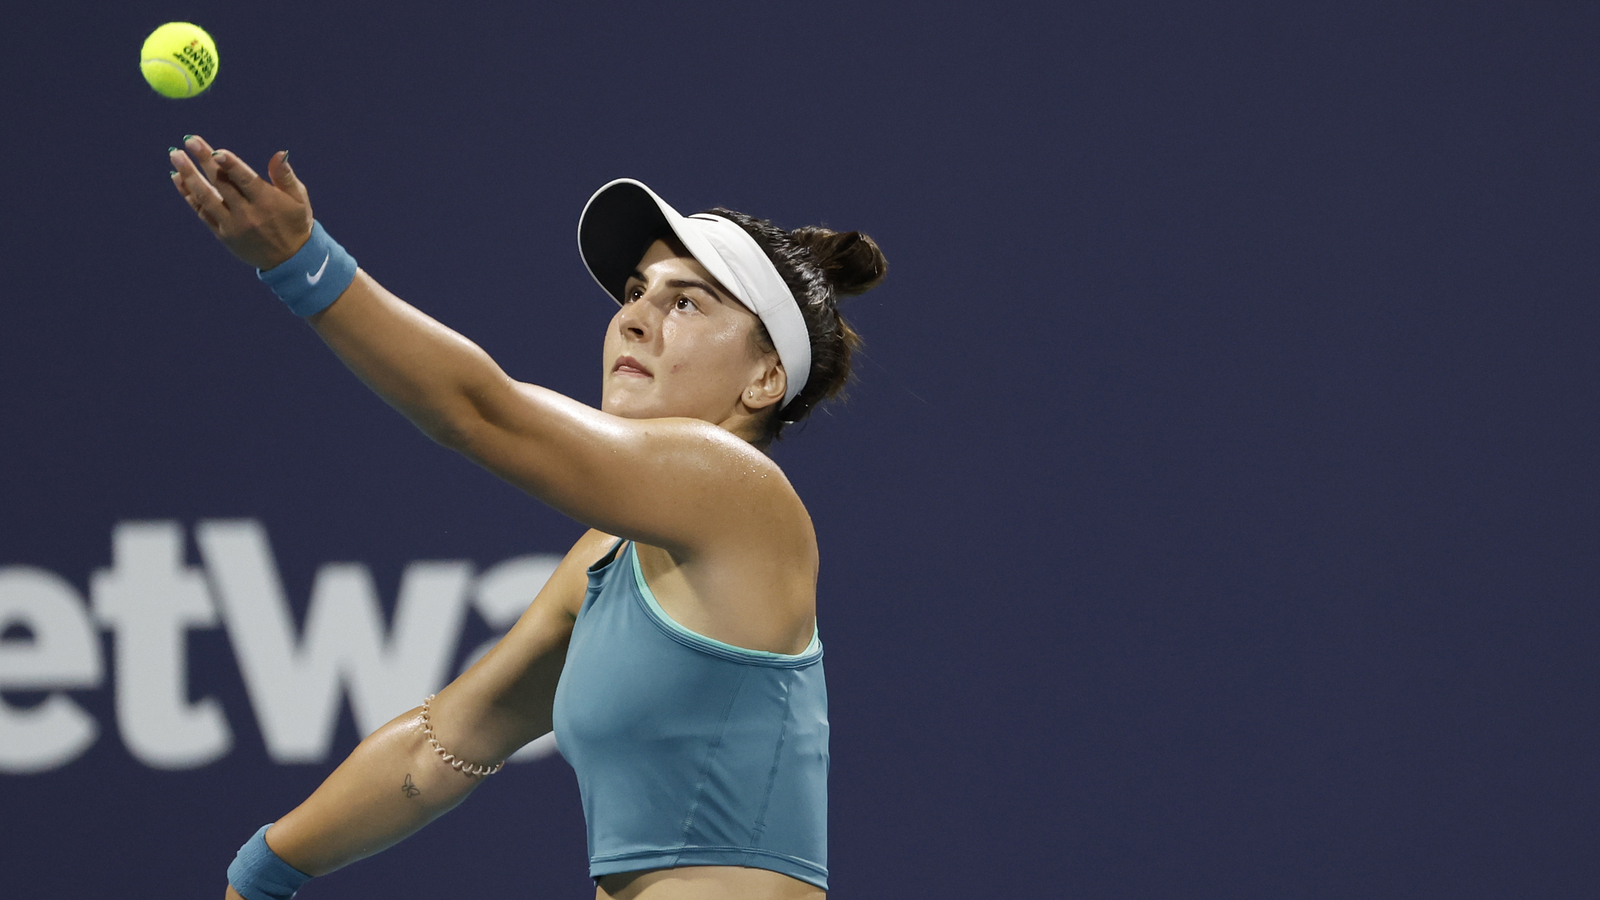 Bianca Andreescu Returns To Practice After Horrific Injury